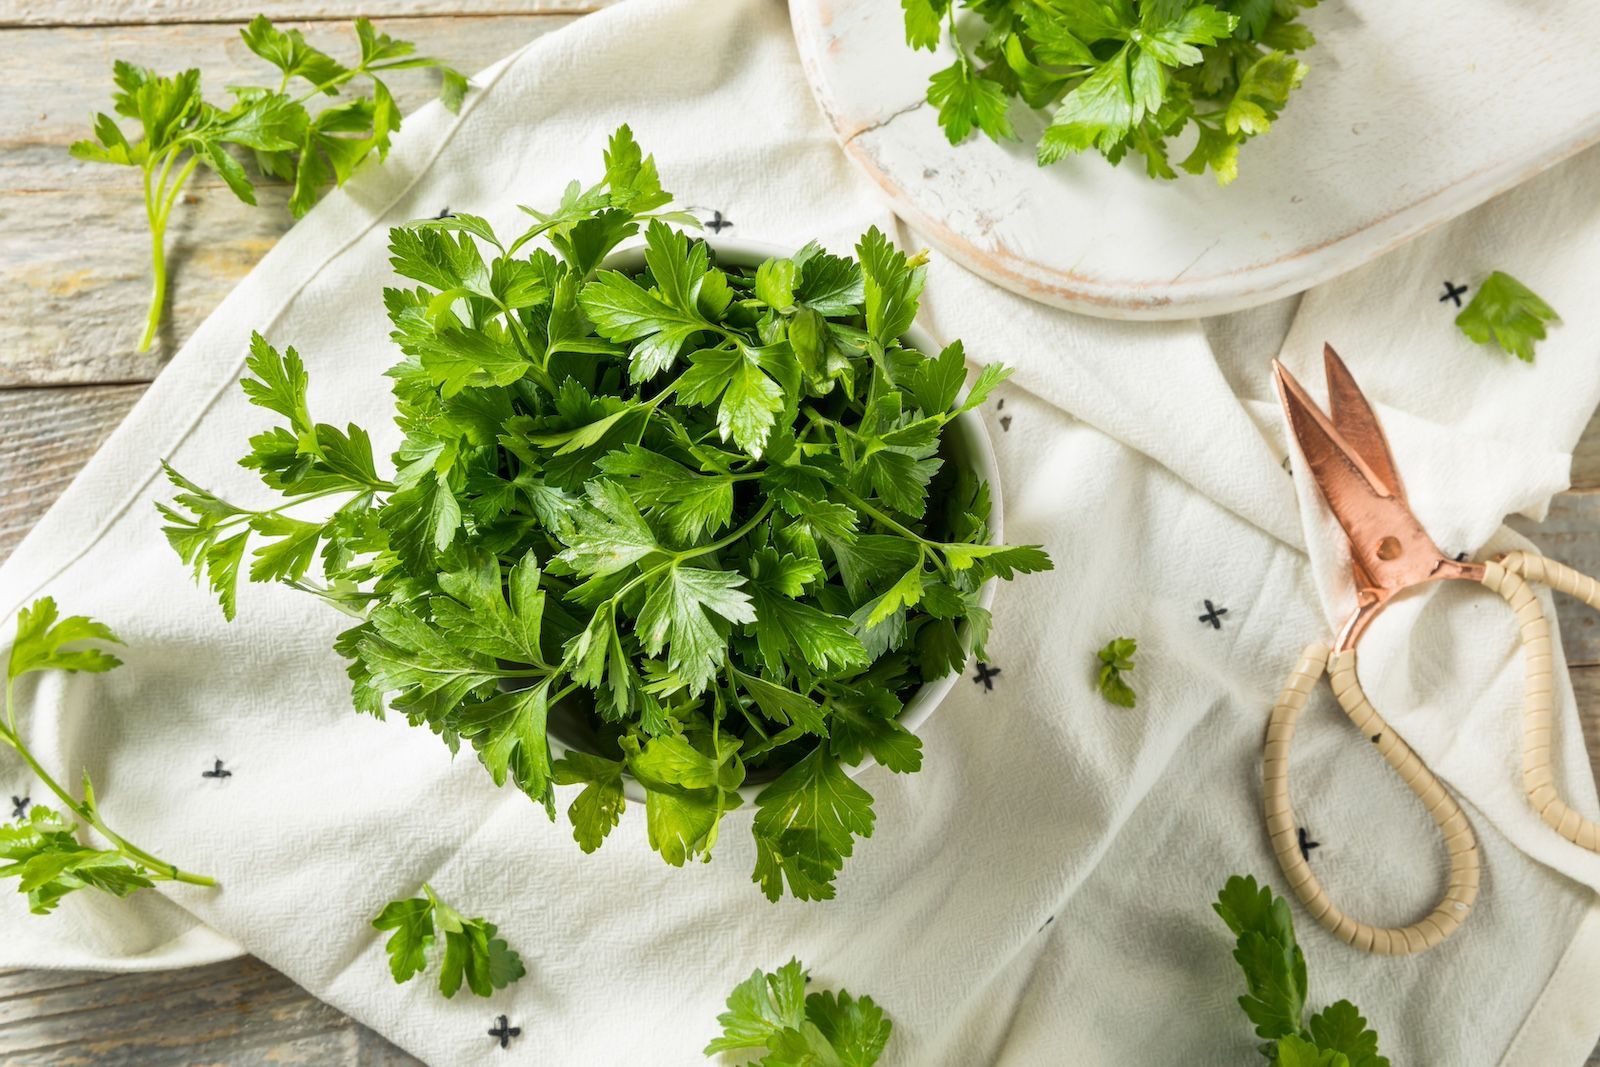 Parsley Isn’t Just Delicious. It Also Has Many Health Benefits. Learn More From Chews Your Health.